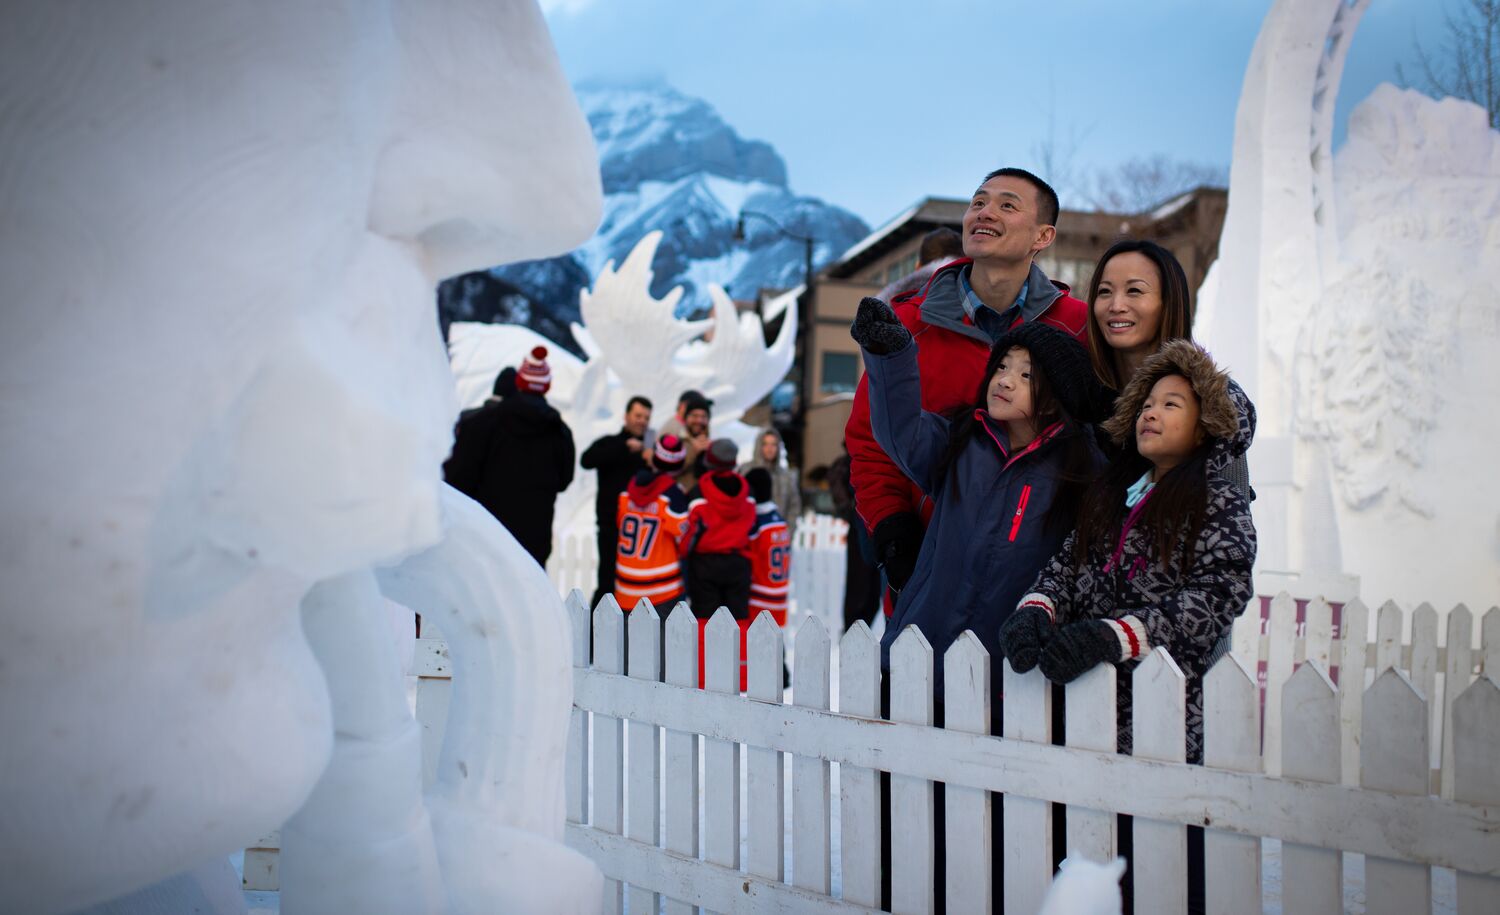 Family of four taking in the snow sculptures during SnowDays on Bear Street in Banff